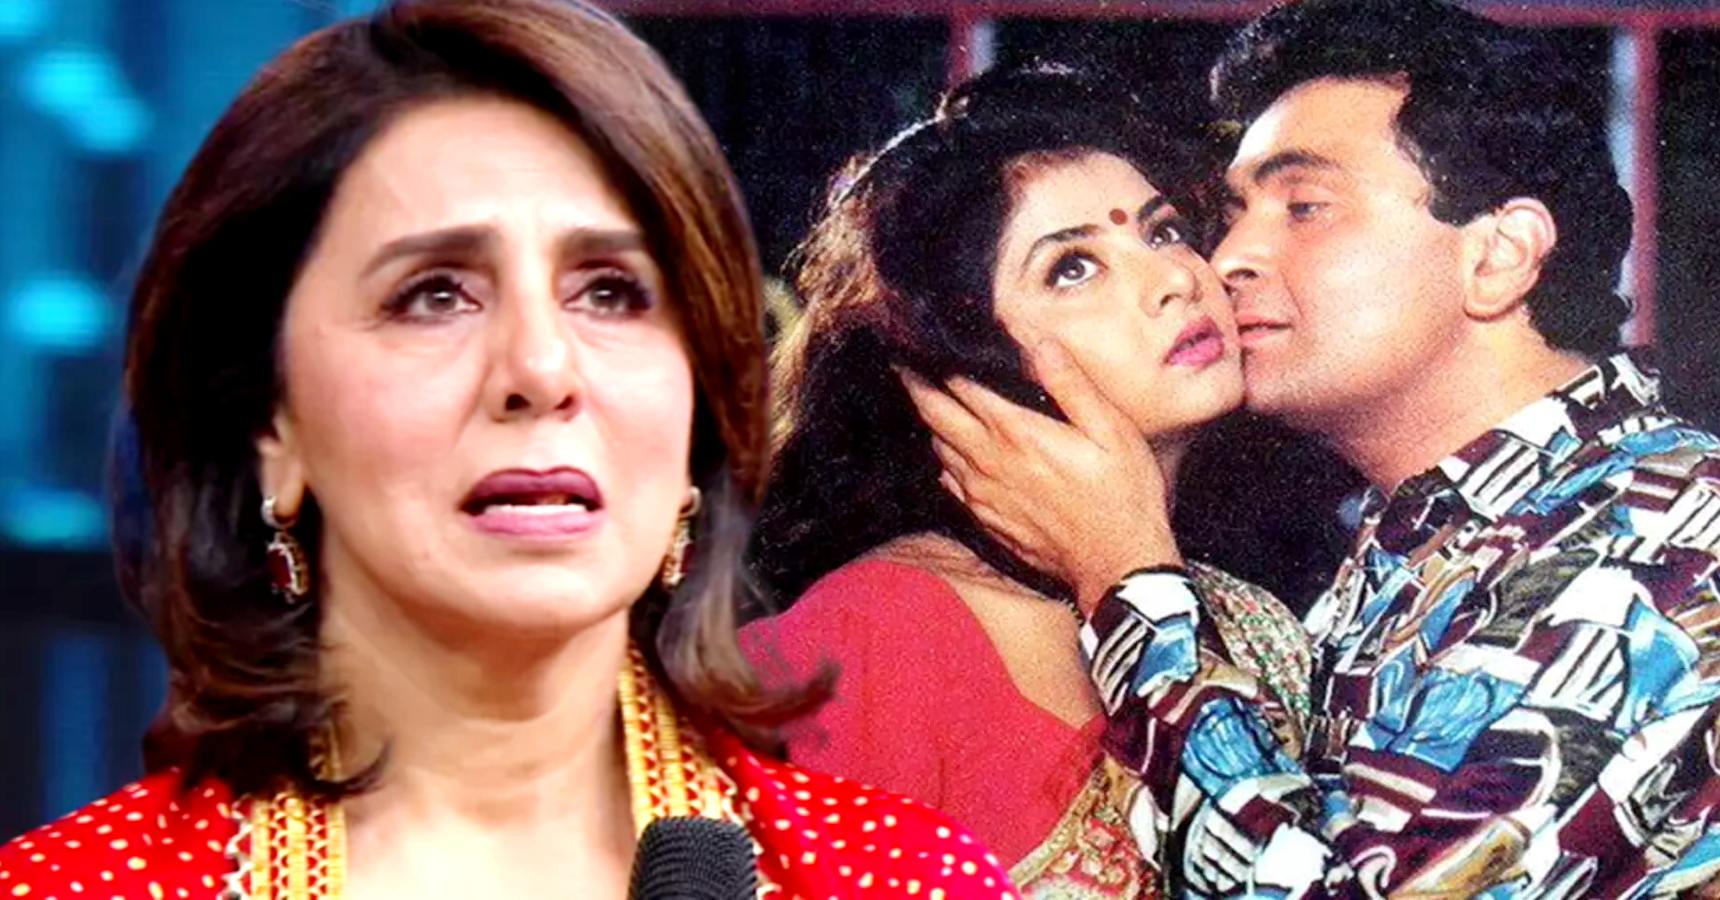 When Bollywood actress Neetu Kapoor opened up about husband Rishi Kapoor’s one night stand